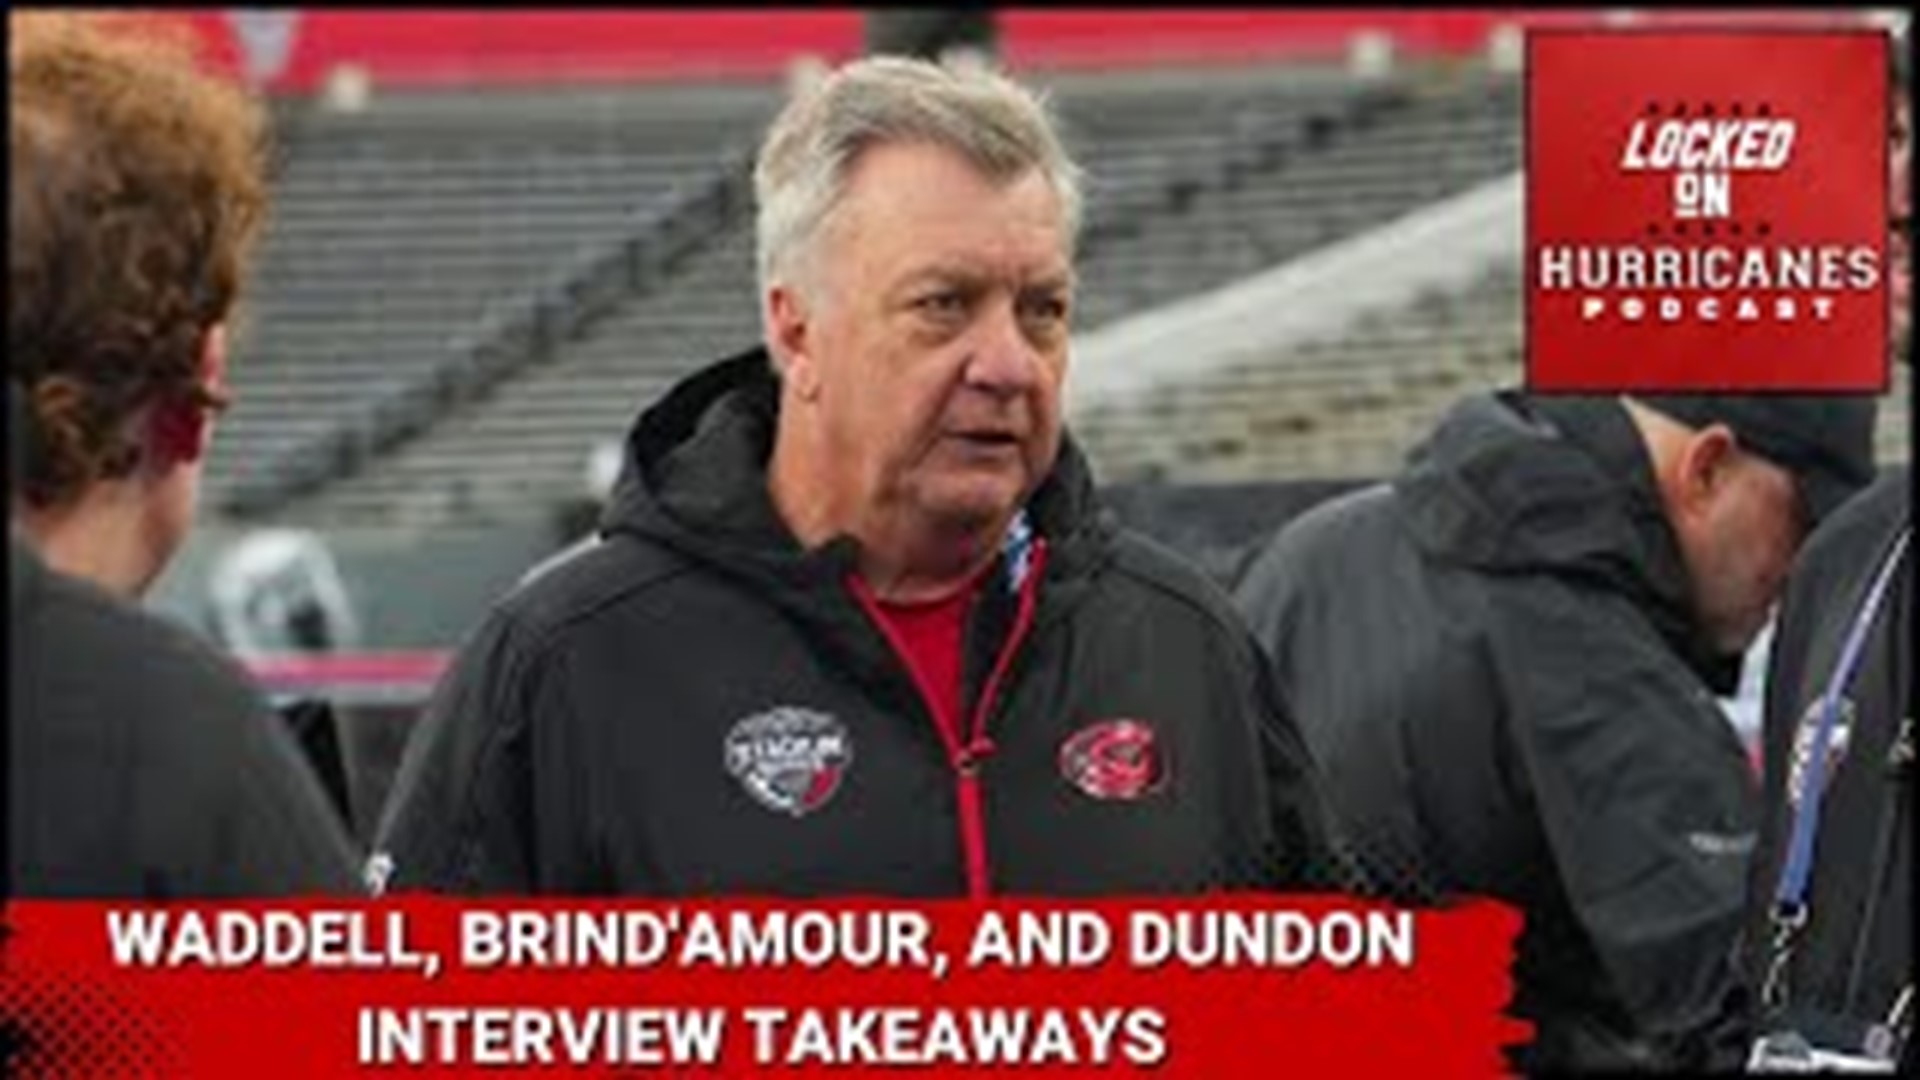 Don Waddell and Rod Brind'Amour recently had their exit interviews, and owner Tom Dundon, had multiple interviews with members of the local media. We break them down